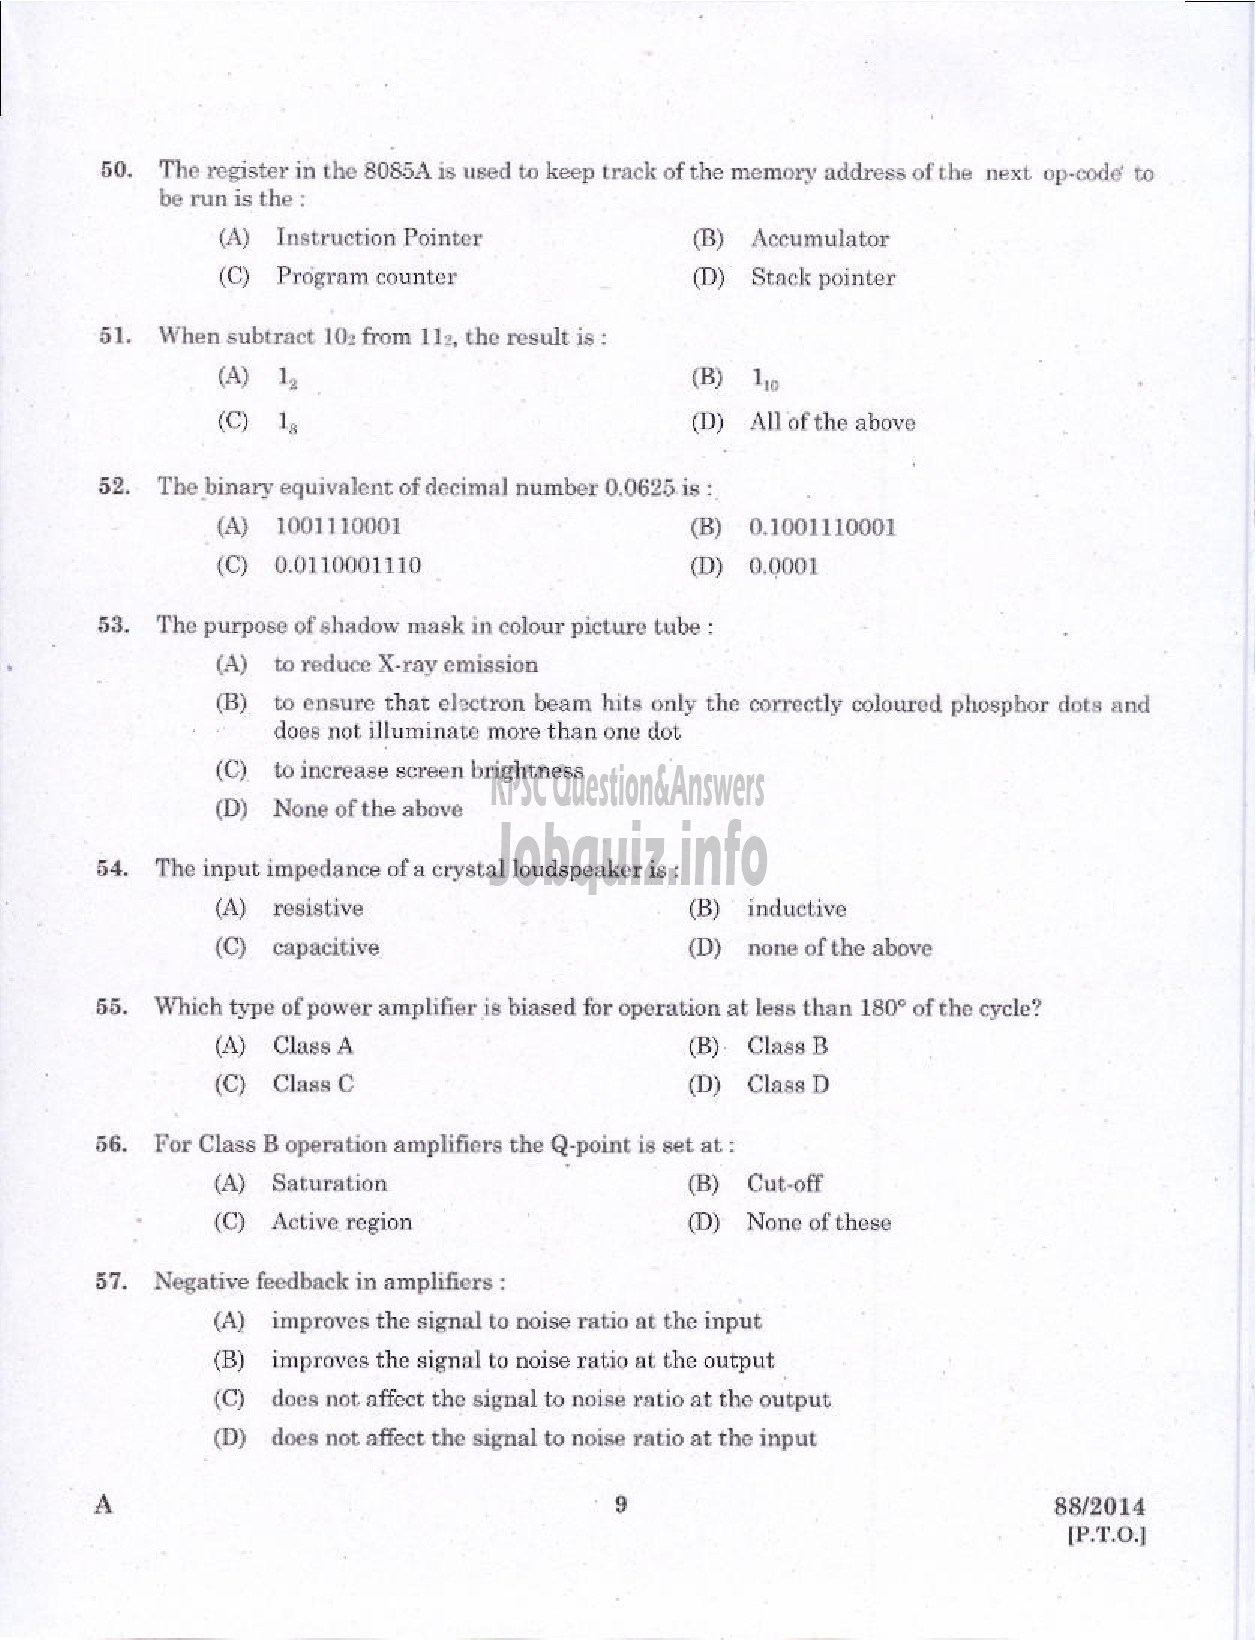 Kerala PSC Question Paper - JUNIOR INSTRUCTOR MECHANICAL CONSUMER ELECTRONICS INDUSTRIAL TRAINING DEPARTMENT-7